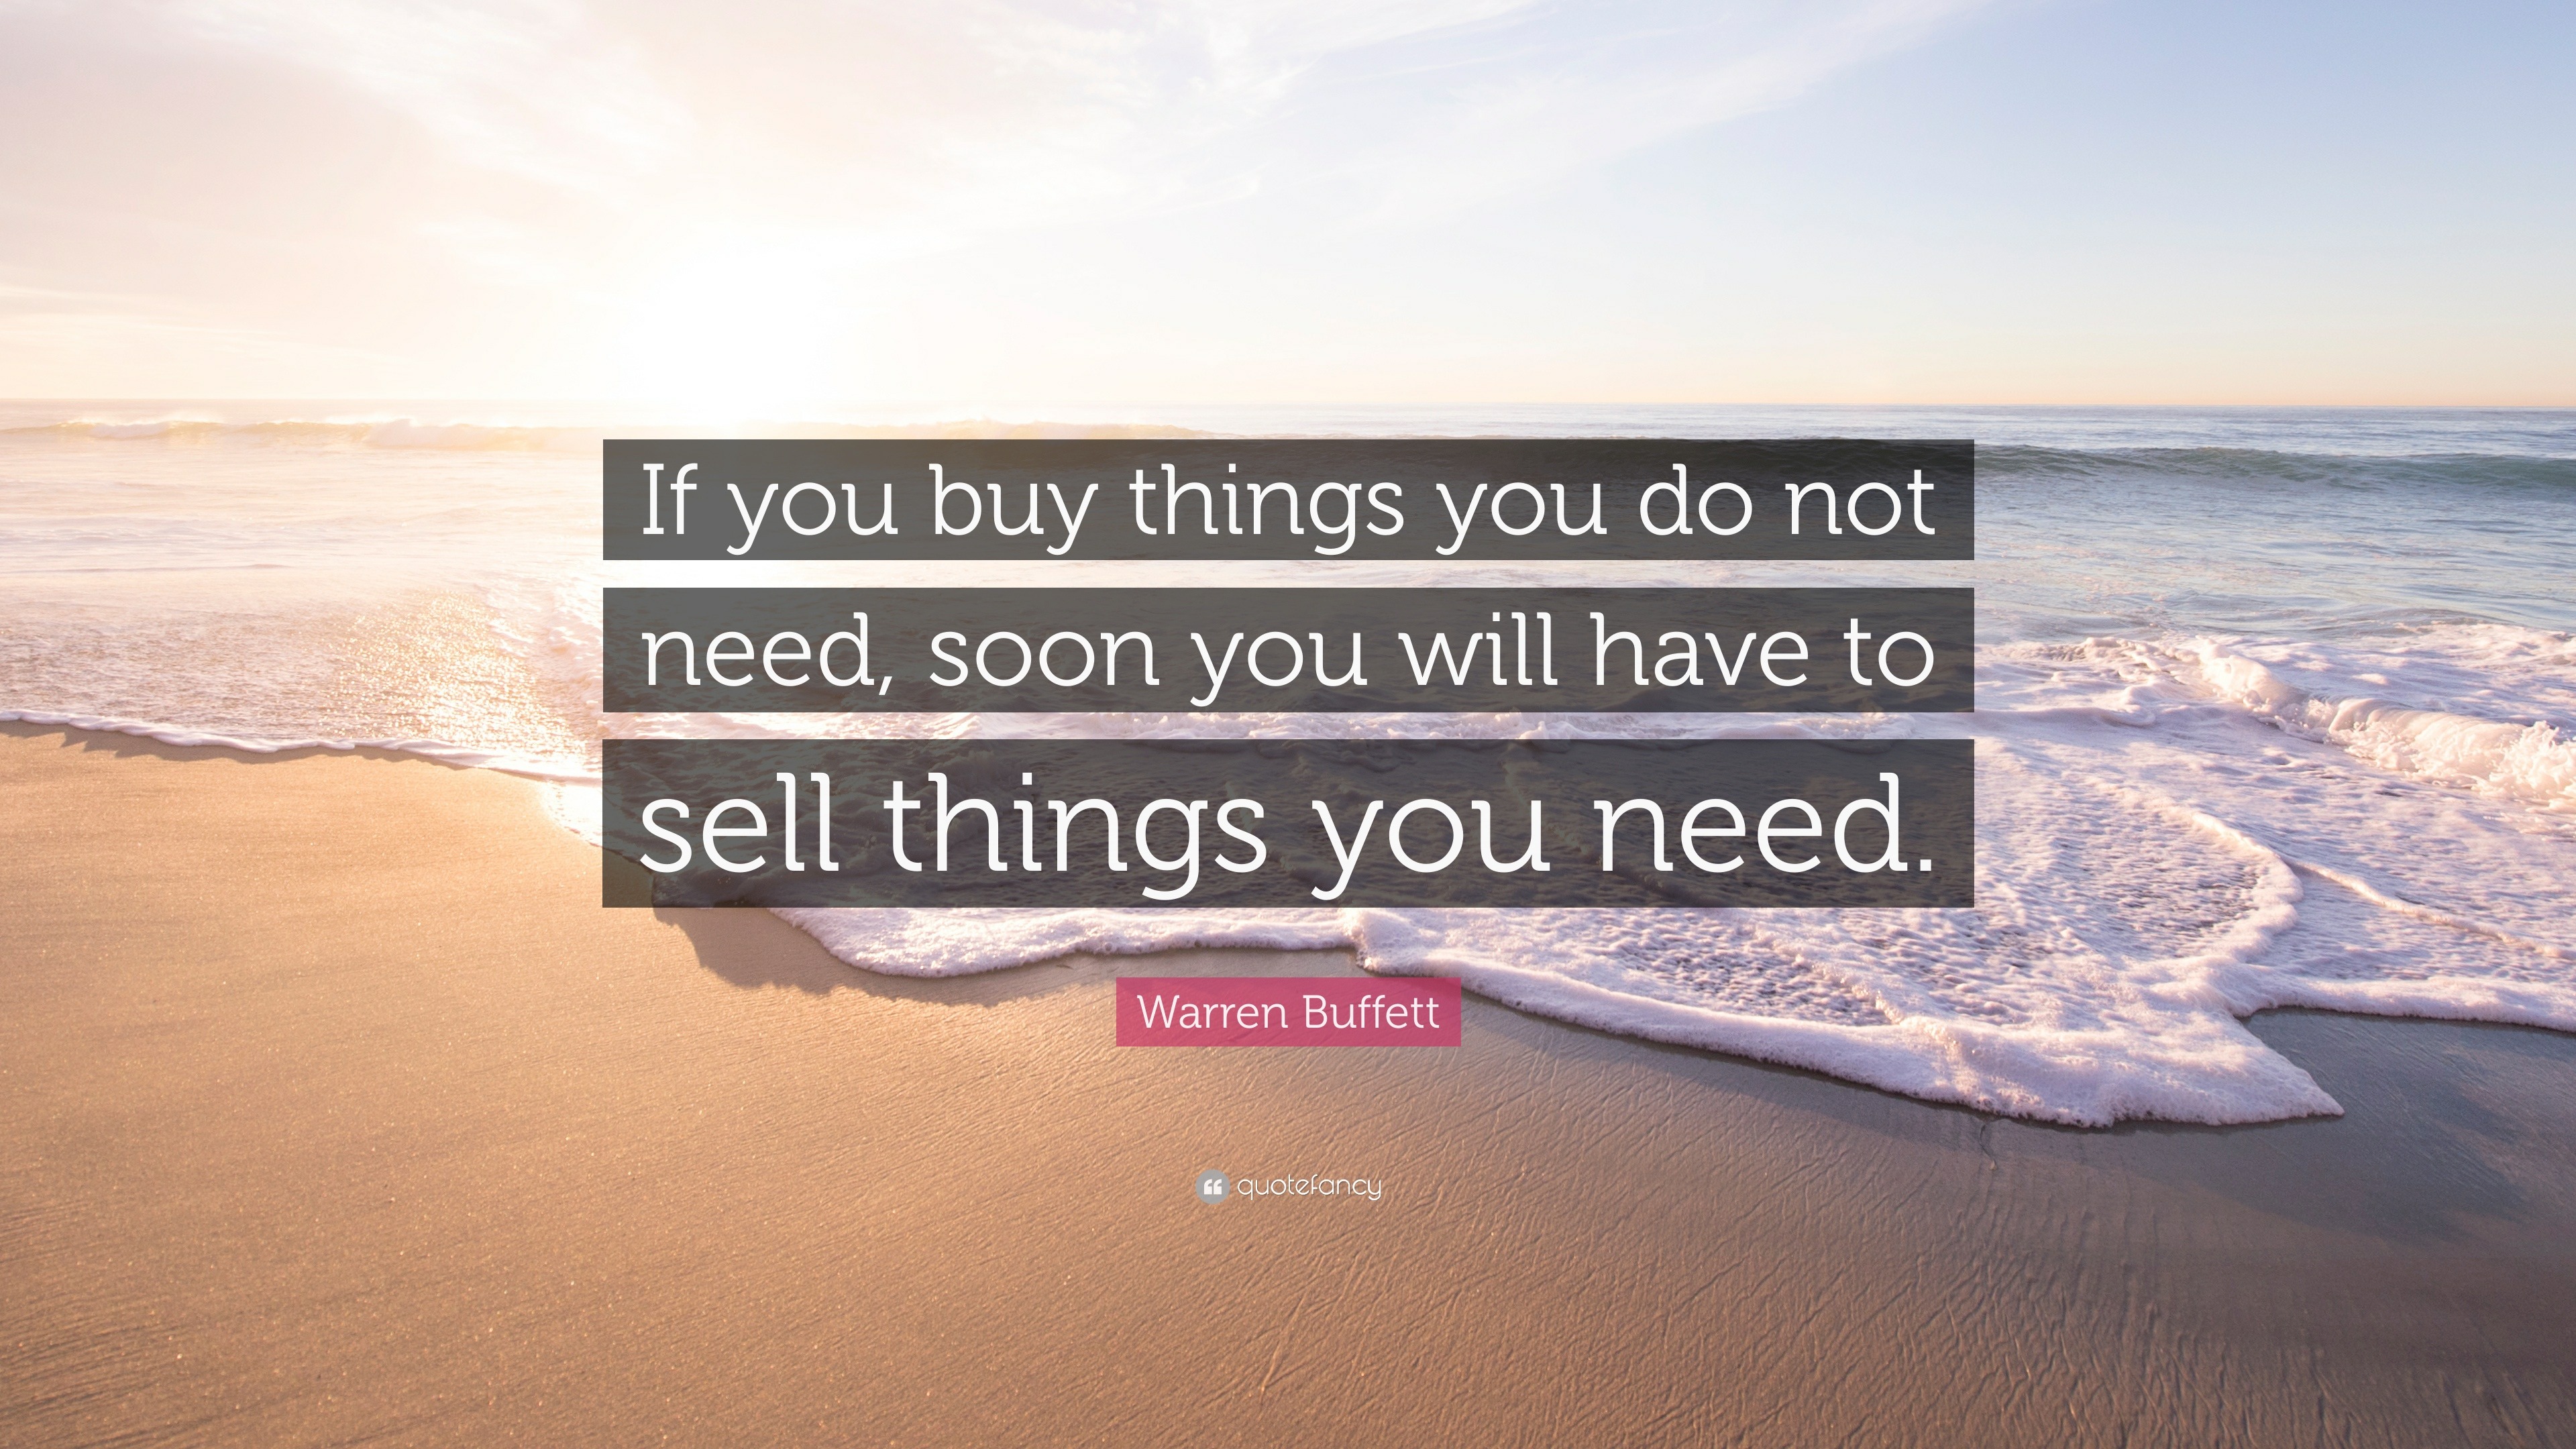 Selling is not your thing!